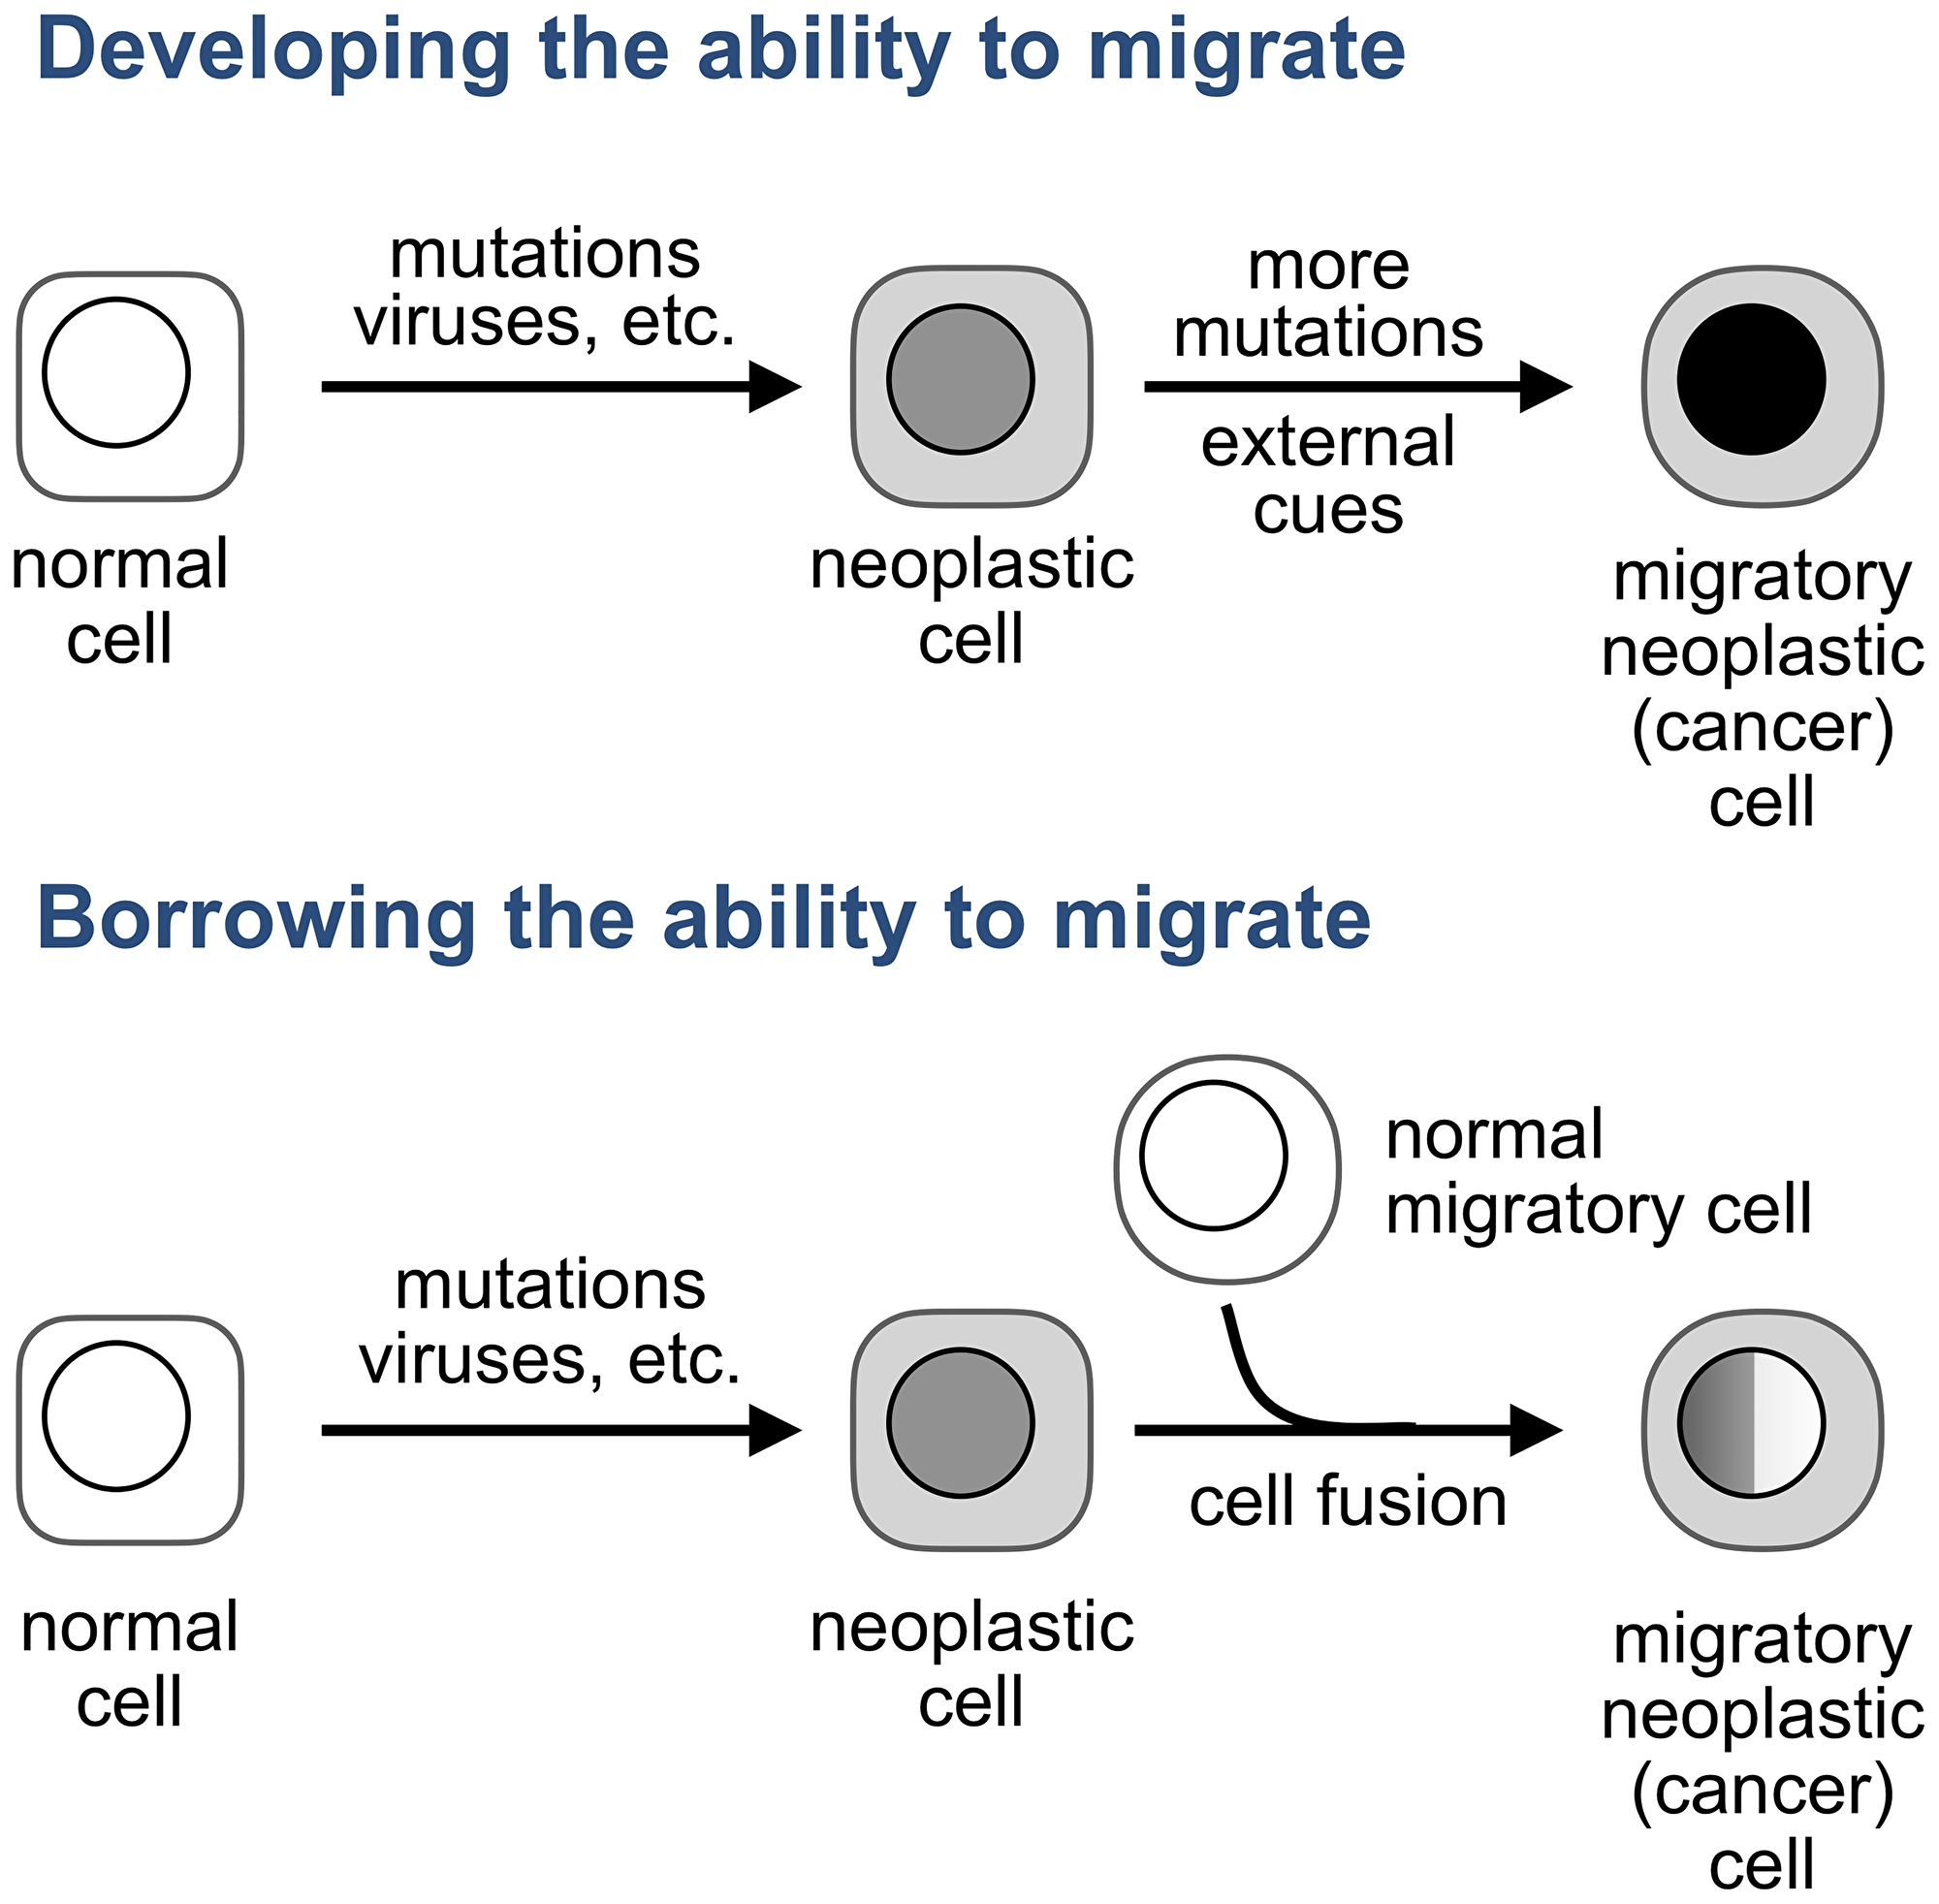 How do tumor cells become migratory?